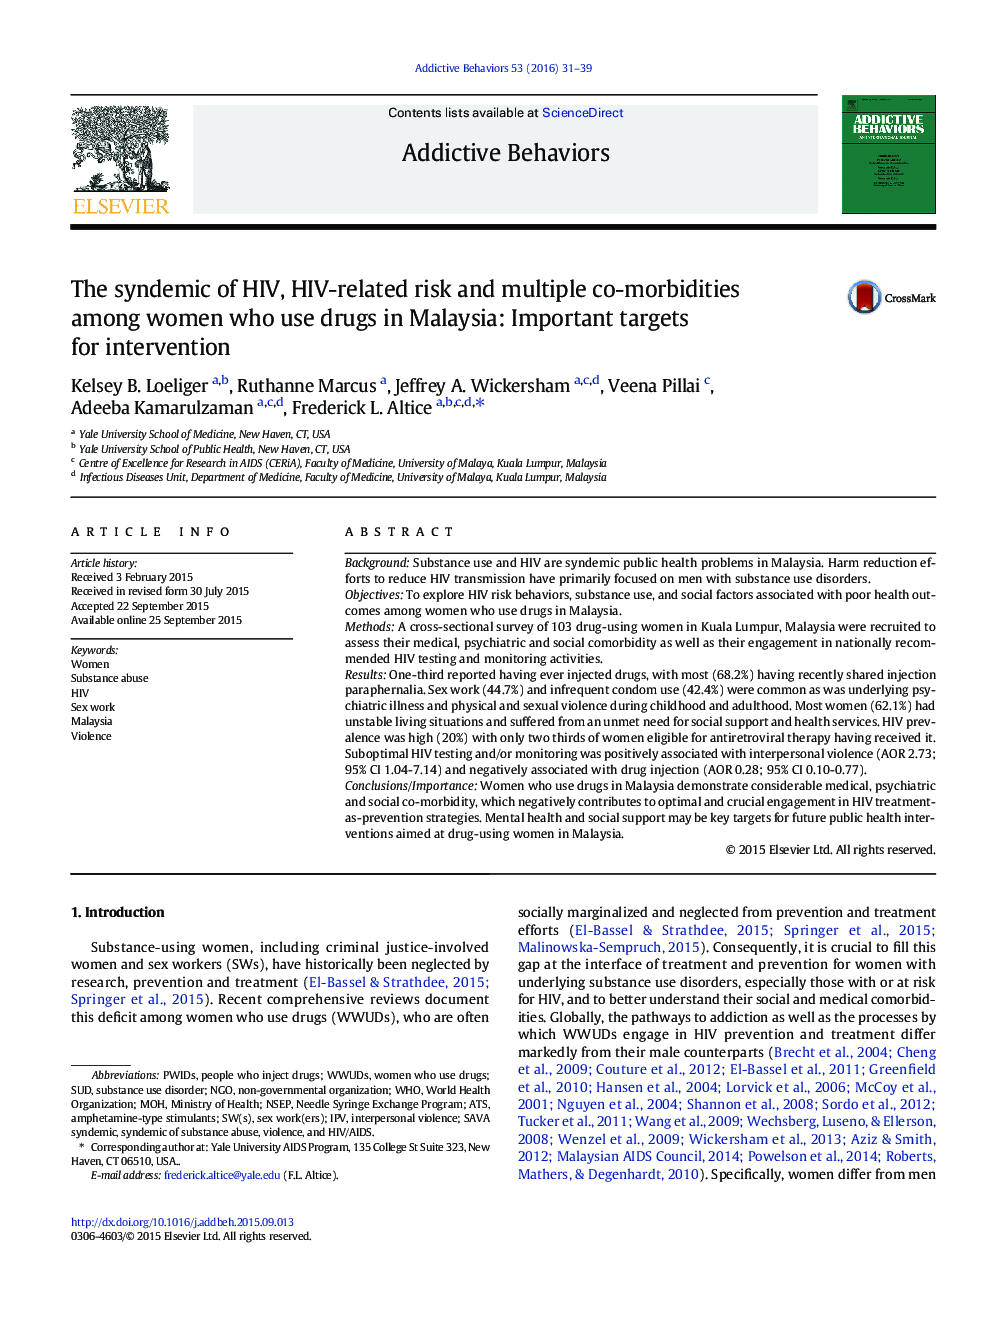 The syndemic of HIV, HIV-related risk and multiple co-morbidities among women who use drugs in Malaysia: Important targets for intervention